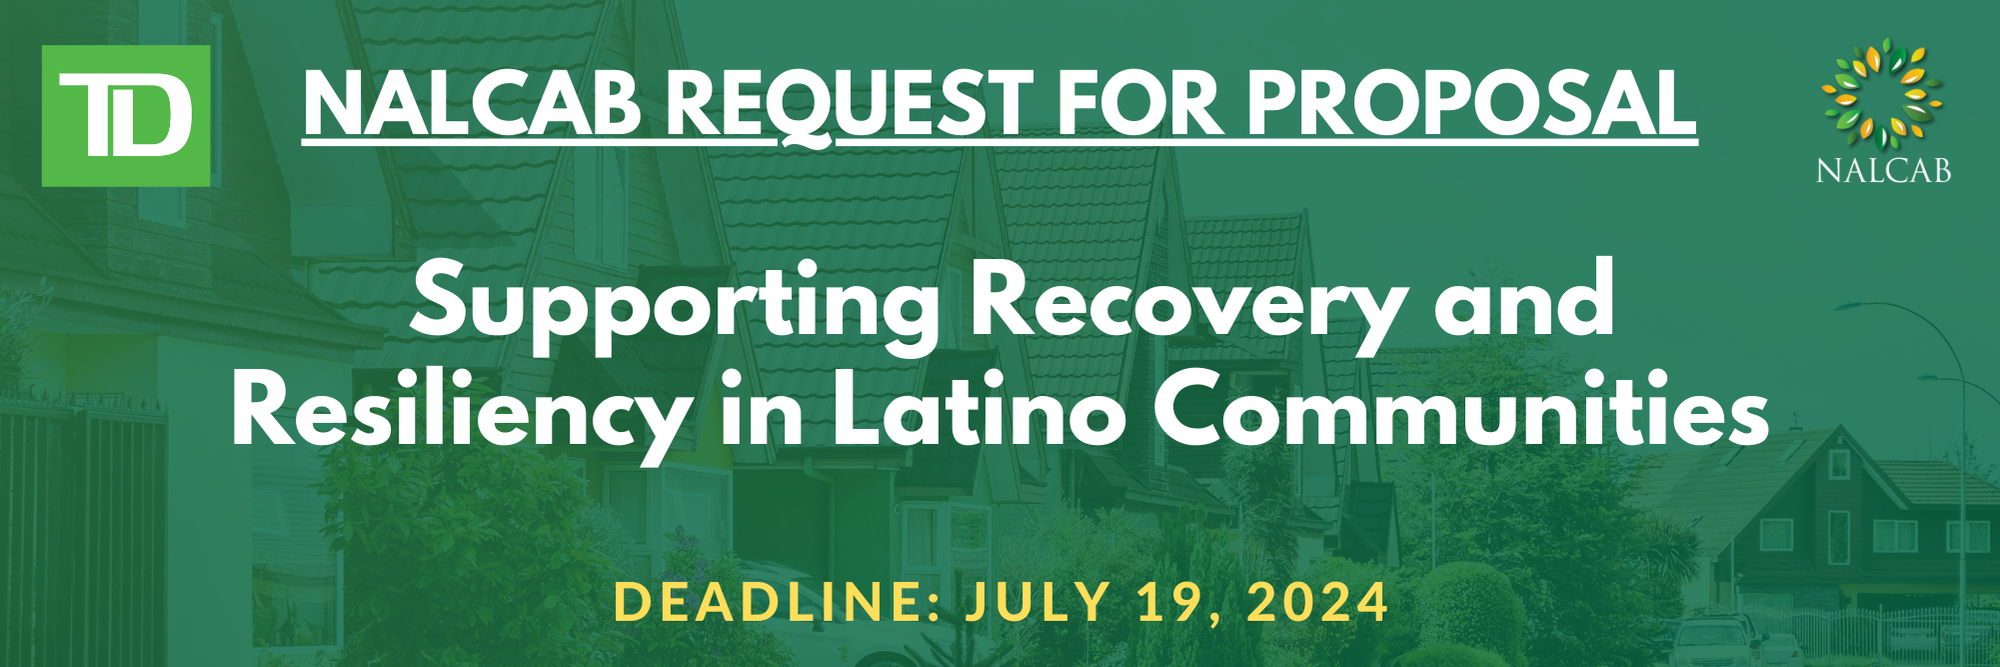 Supporting Recovery and Resiliency in Latino Communities Baner